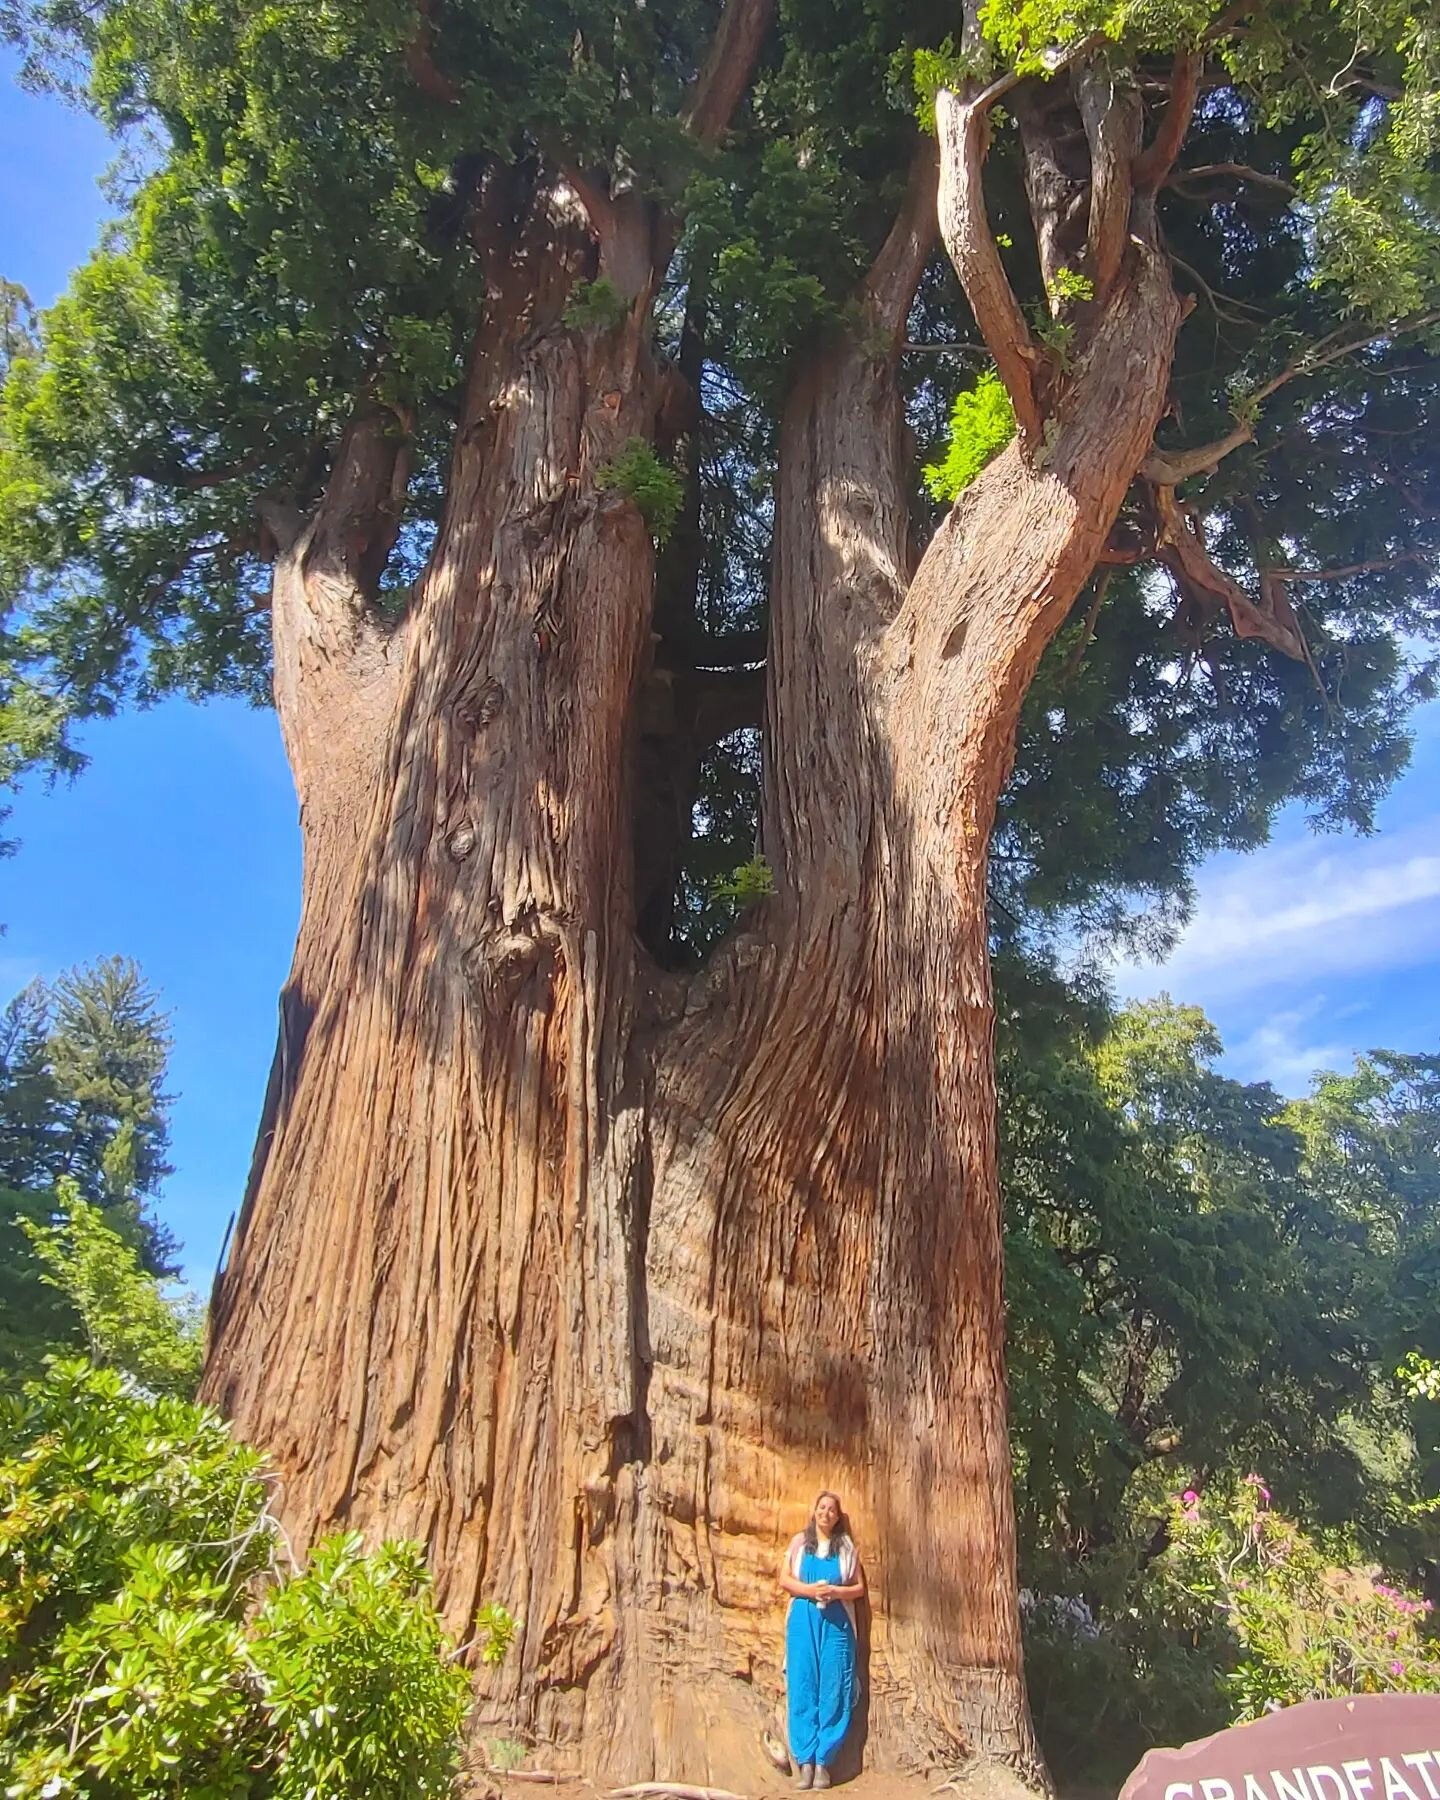 Being in the presence of this unbelievable 1800 year old tree in the Redwoods felt like the biggest blessing. I am so thankful to Grandfather Tree to be there for me on this trip where I am connecting so deeply to my Grandad. What a gift from the Uni